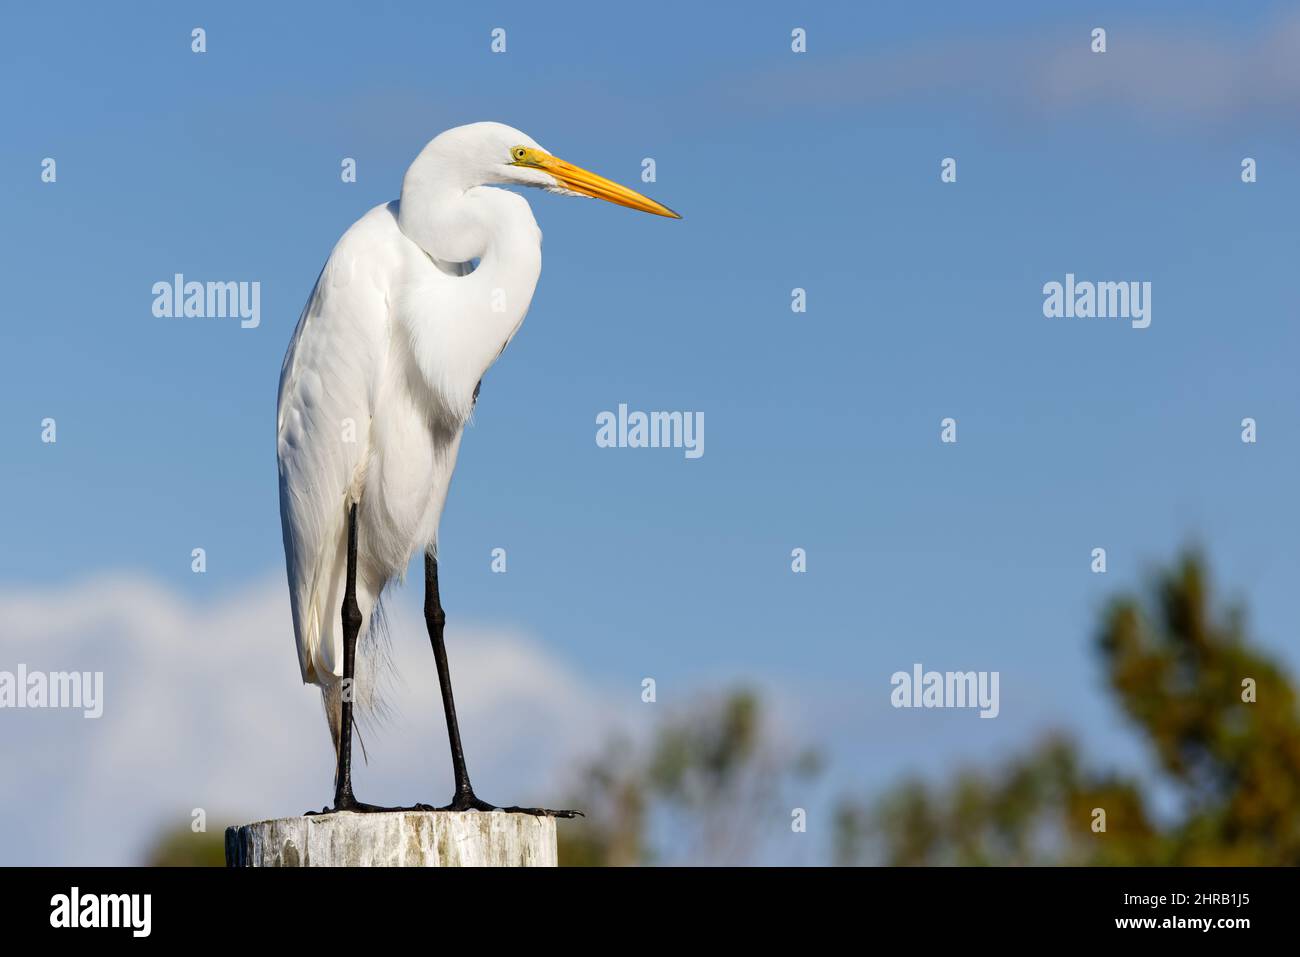 Beautiful Great Egret (ardea alba) perched on a dock piling against a blue sky. Stock Photo